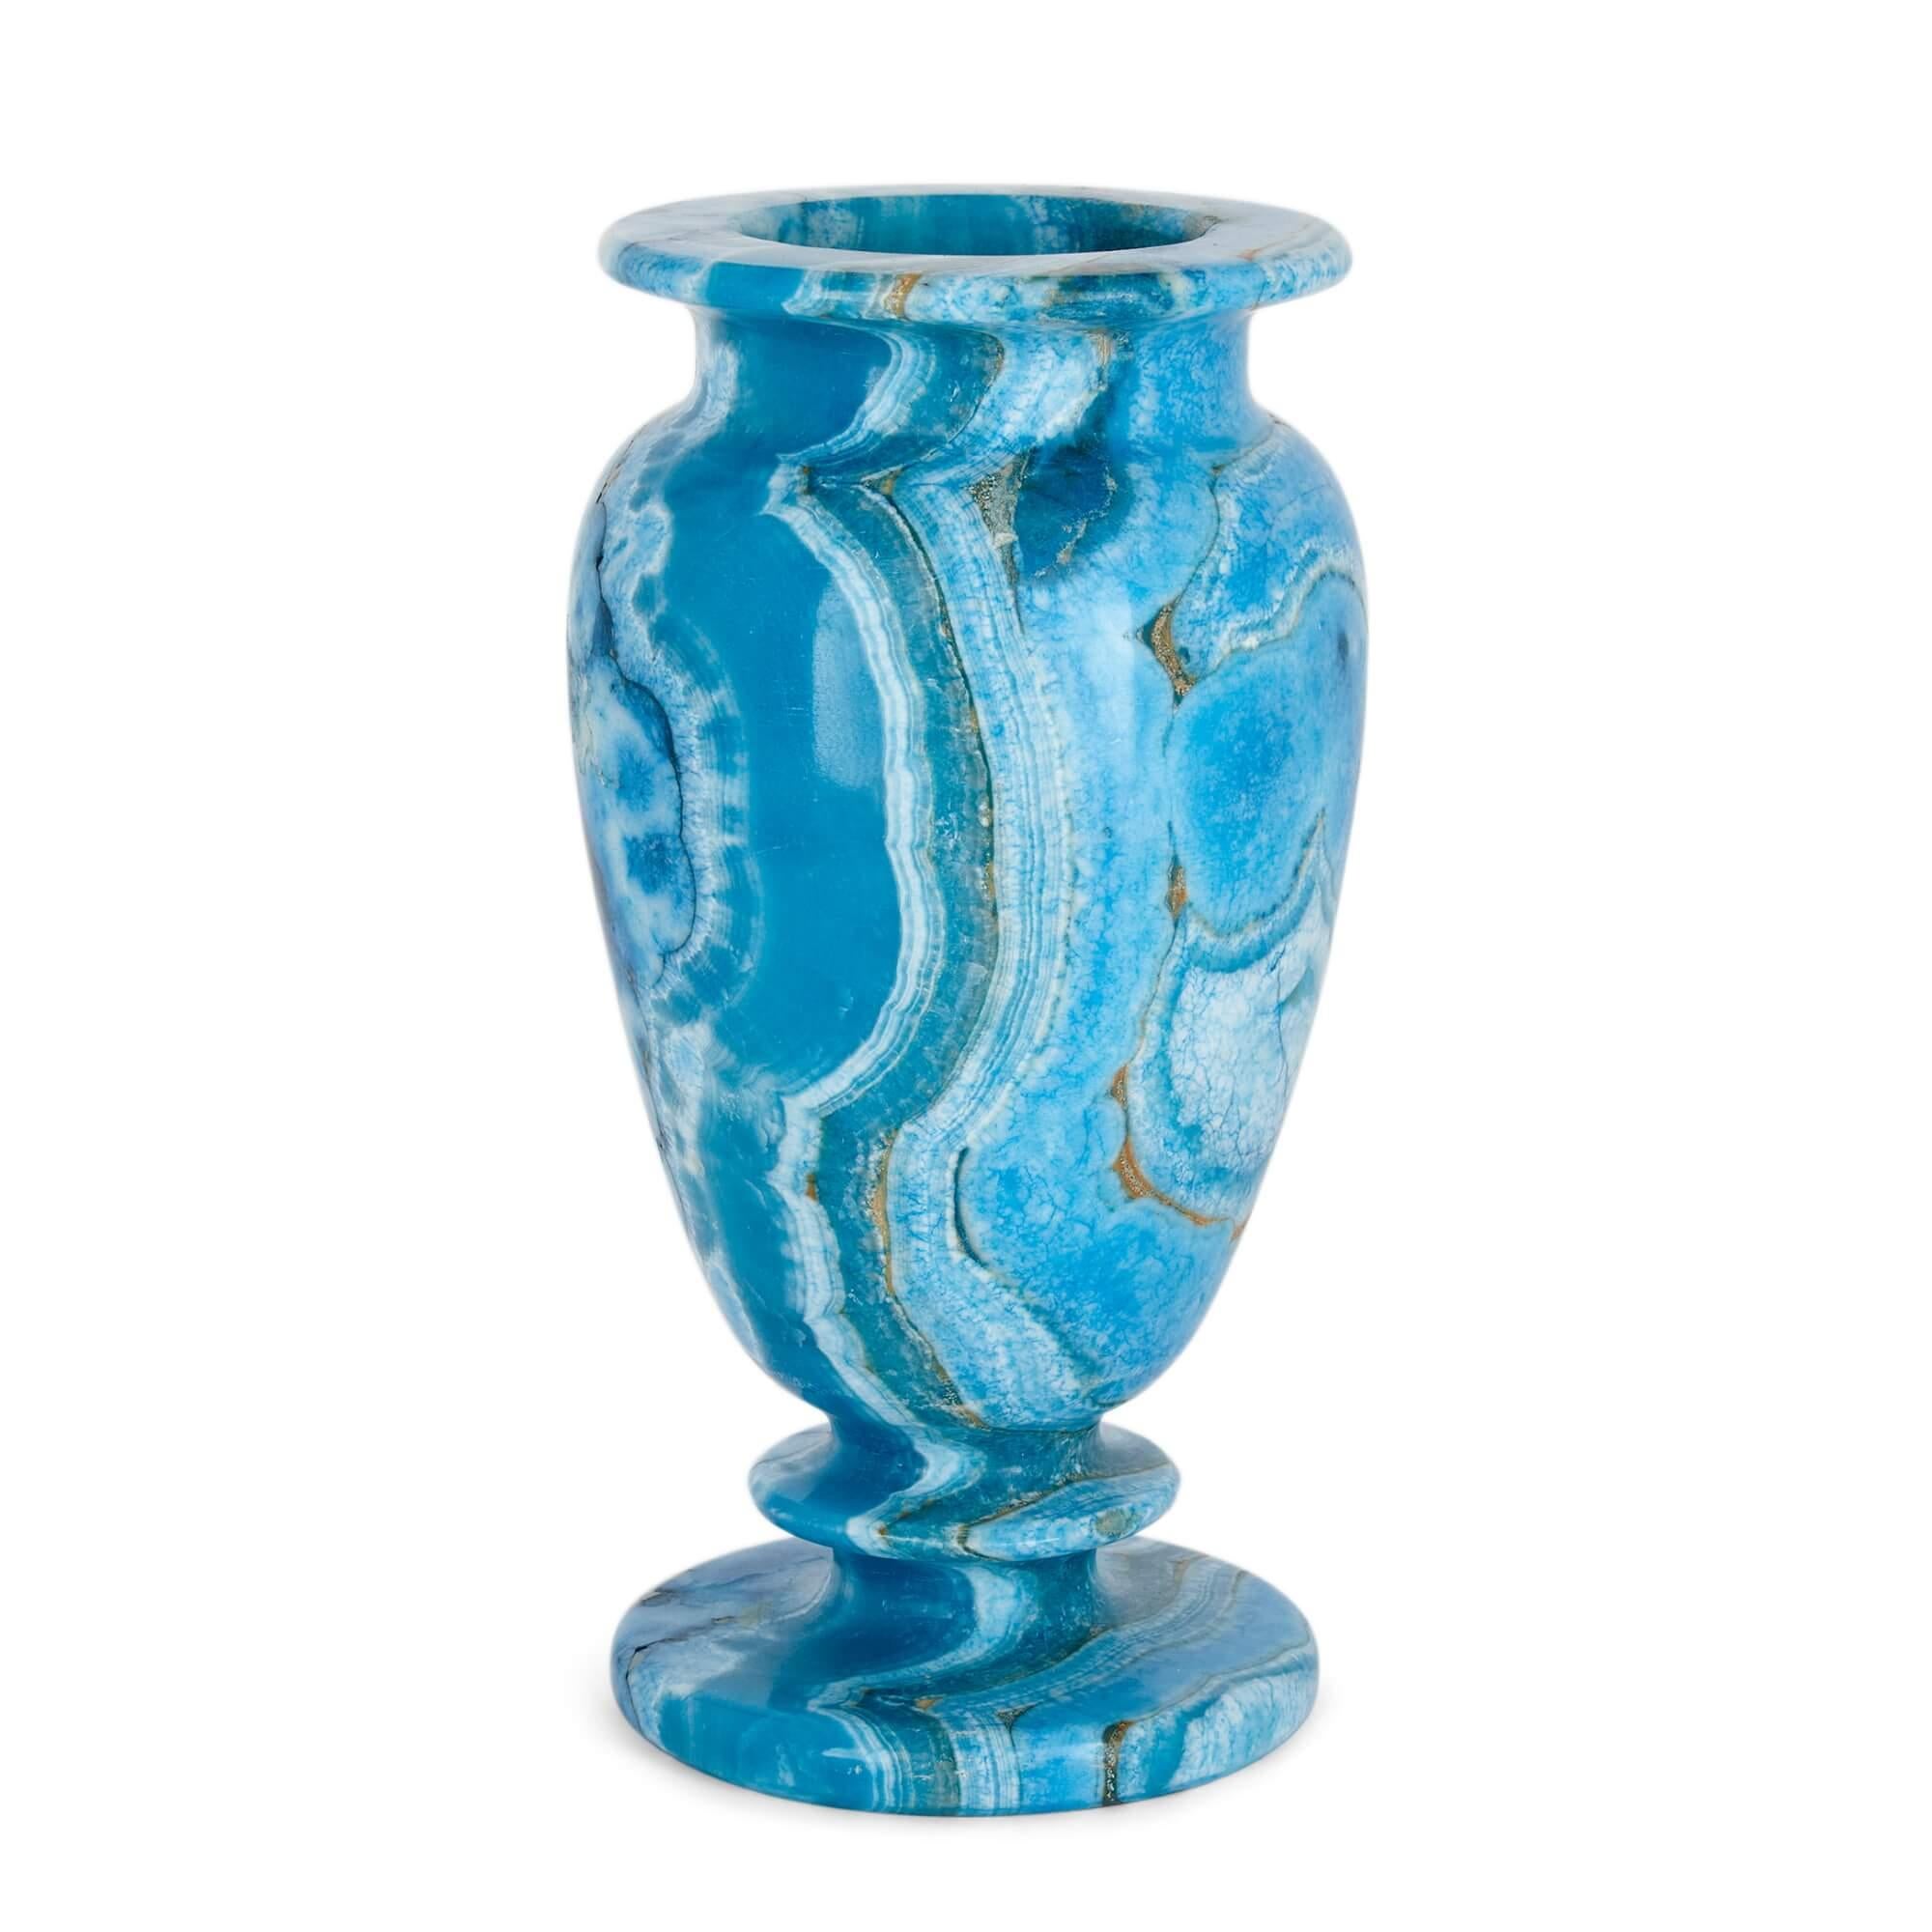 A blue-dyed calcite urn-shaped mineral vase.
Continental, 20th century.
Measures: height 25cm, width 13cm, depth 12cm.

This beautiful vase is a twentieth century Continental piece, of unclear provenance, made with naturally spectacular